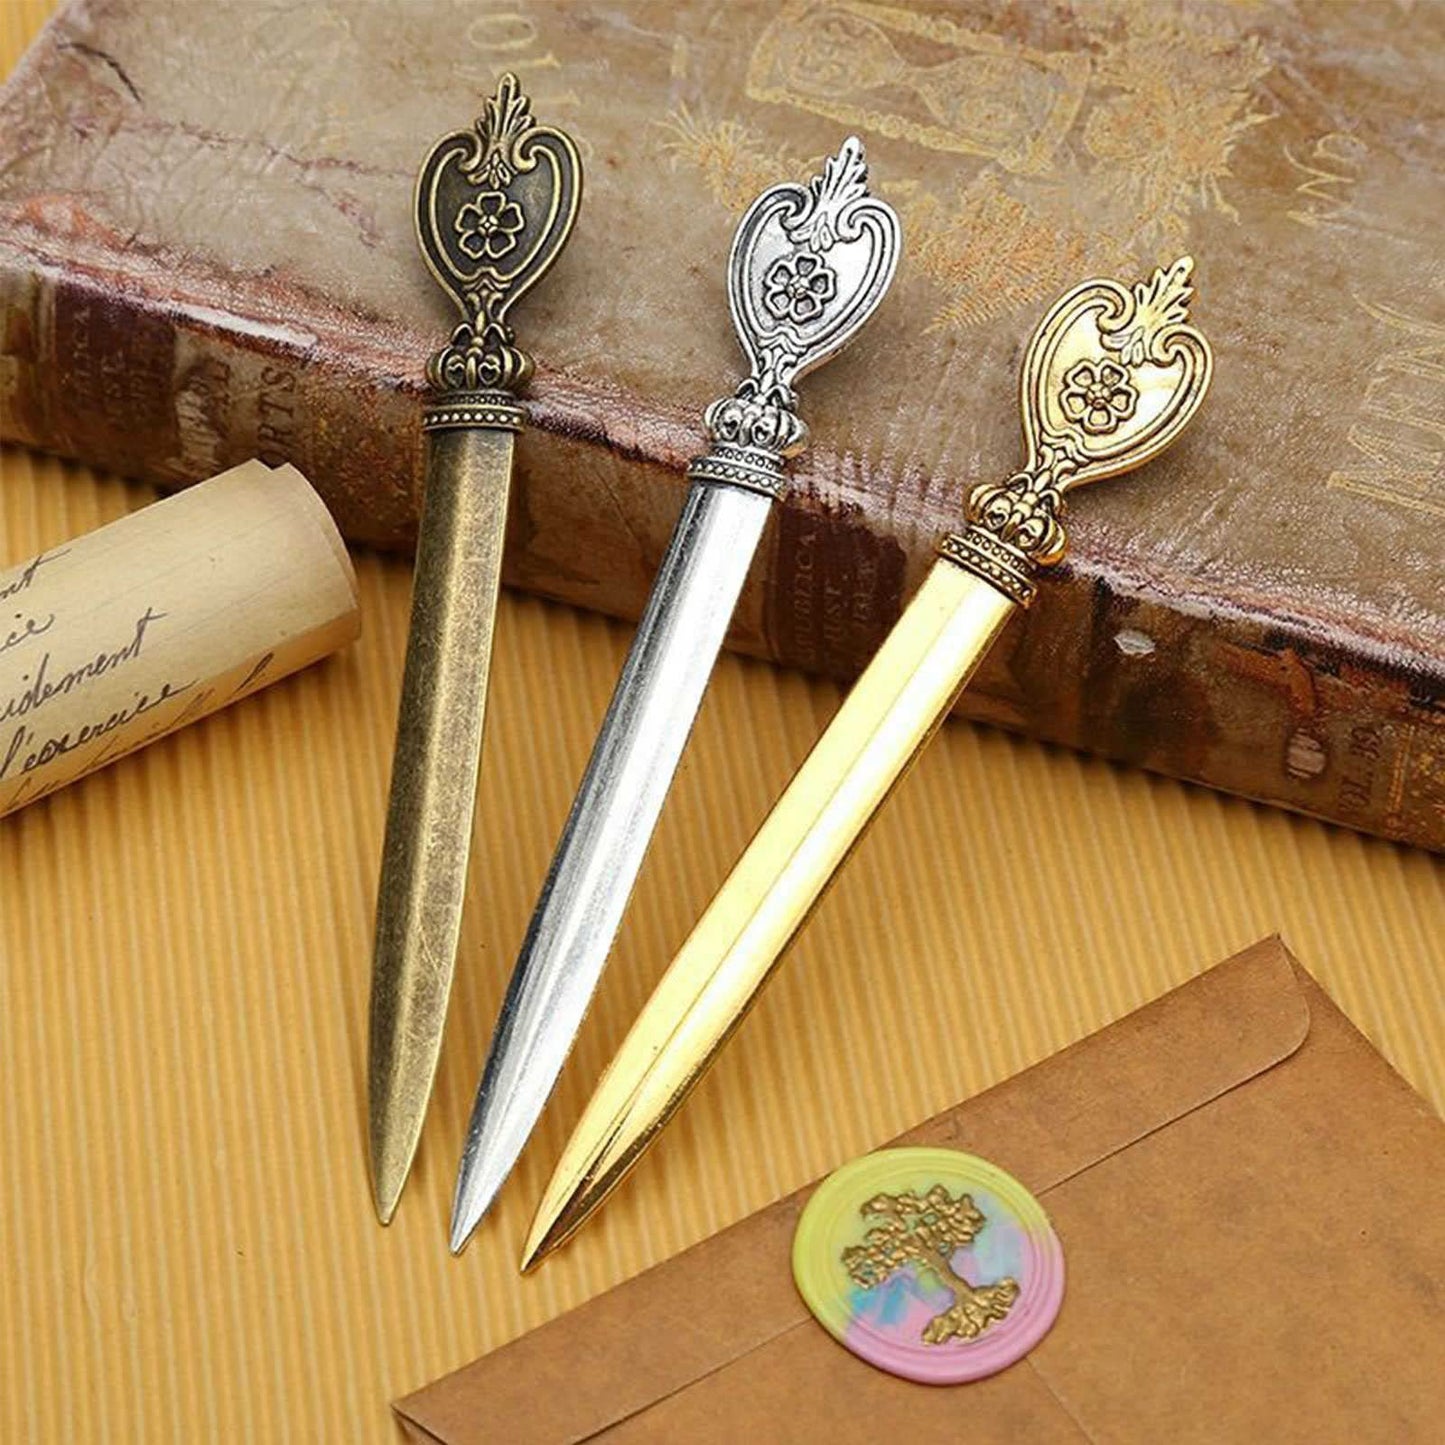 Letter Opener in Office Supplies - Classical Vintage Bookmark & Office Paper Cutter, Ergonomic Grip Handle